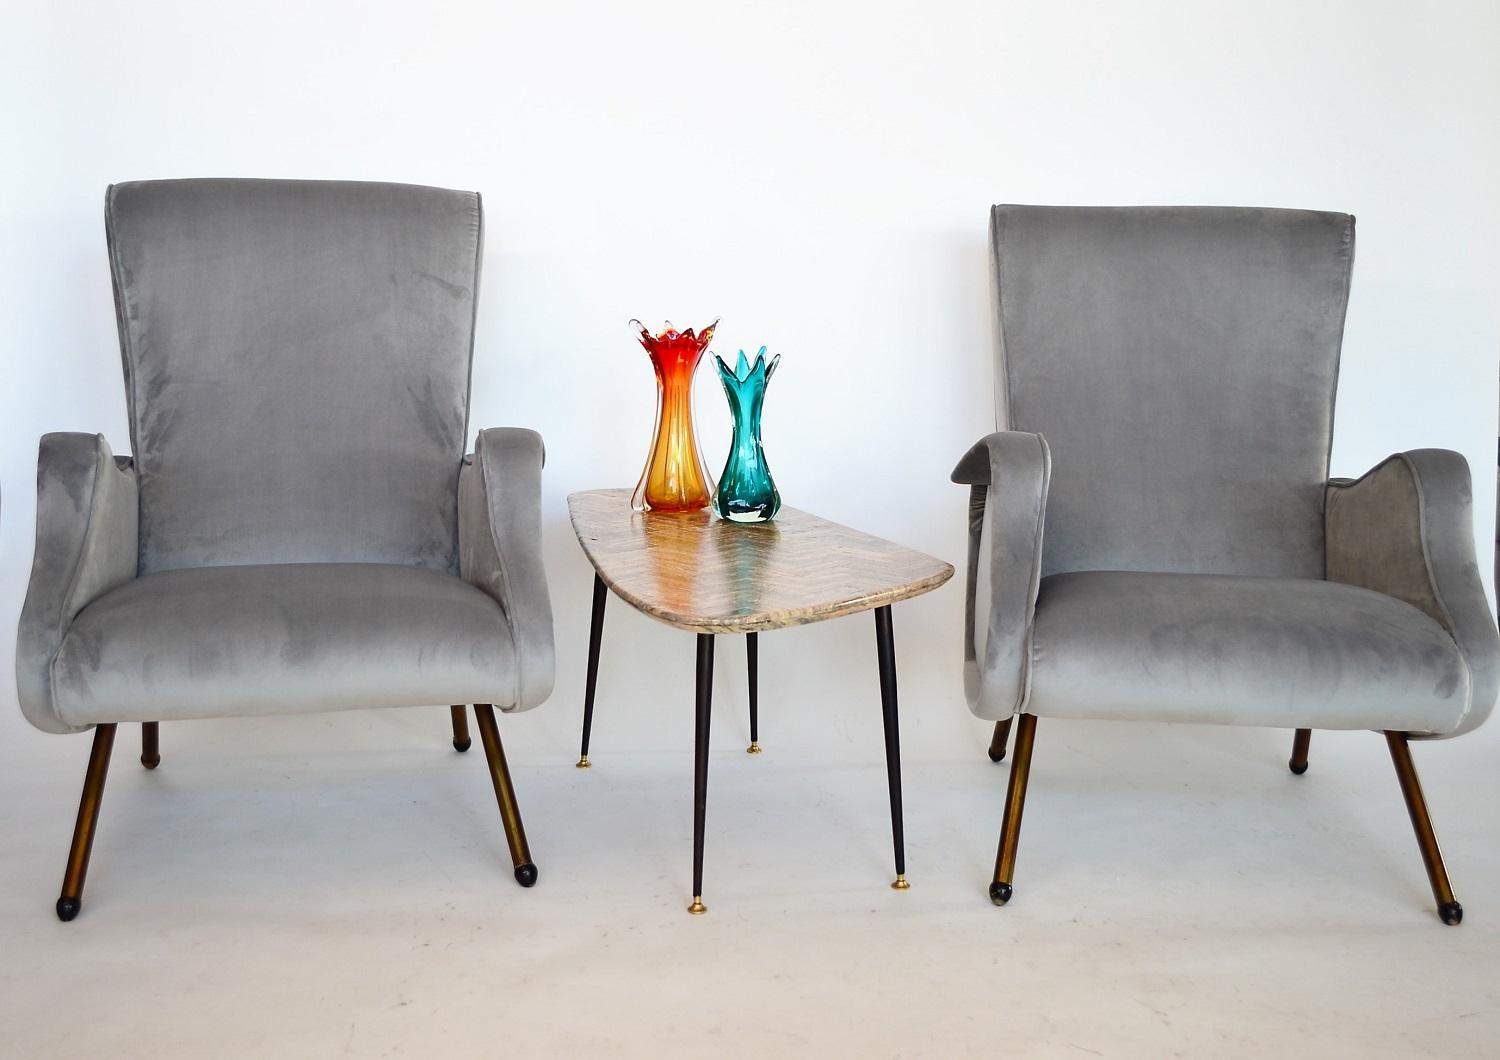 Italian Midcentury Armchairs Restored and Reupholstered in Grey Velvet, 1950s 13